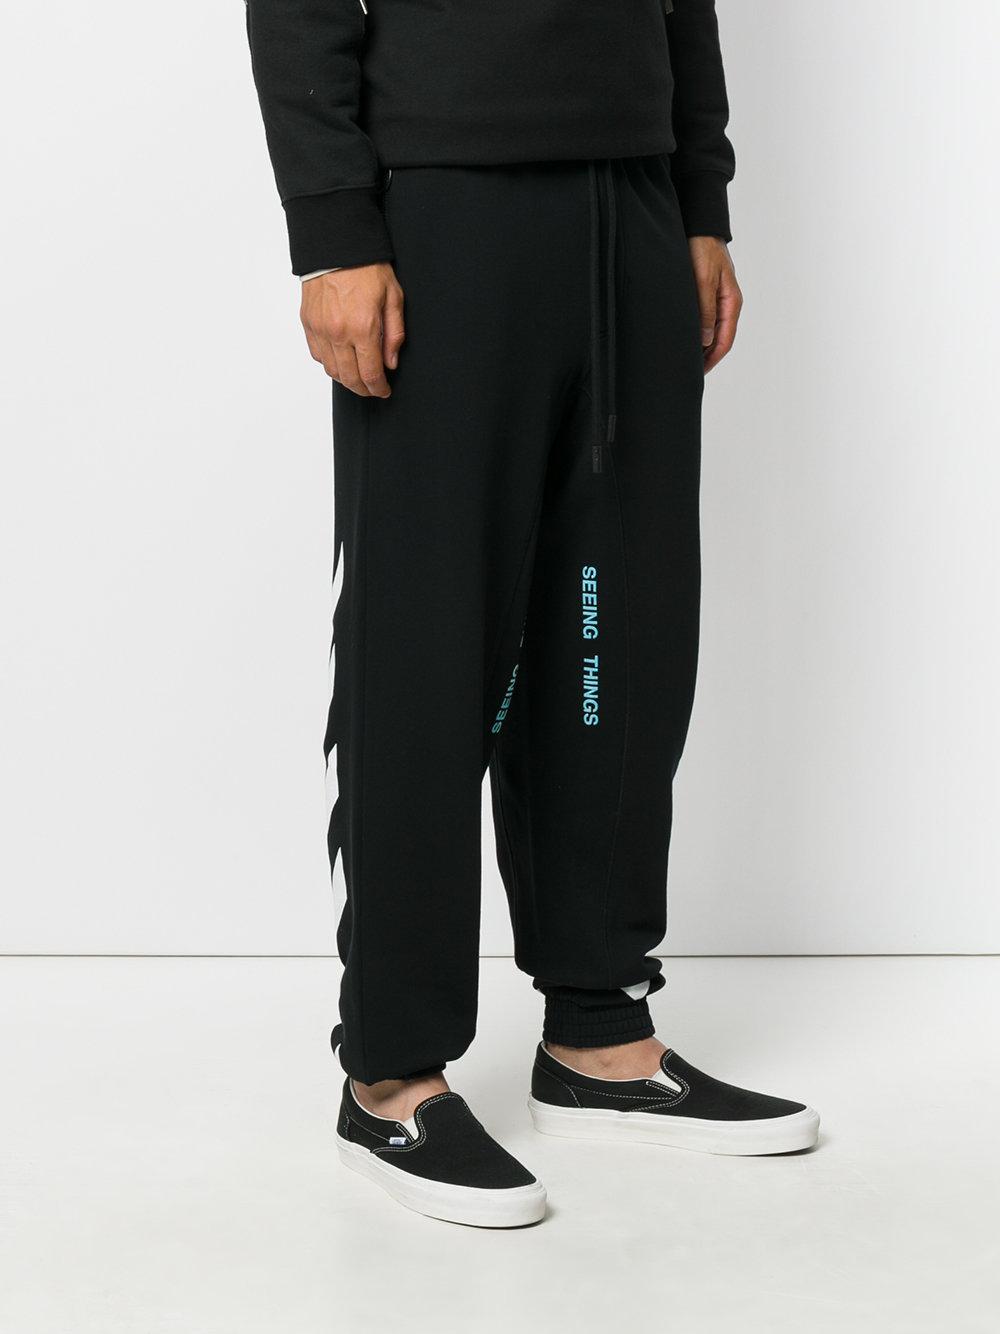 Off-White c/o Virgil Abloh Seeing Things Track Pants in Black for Men | Lyst